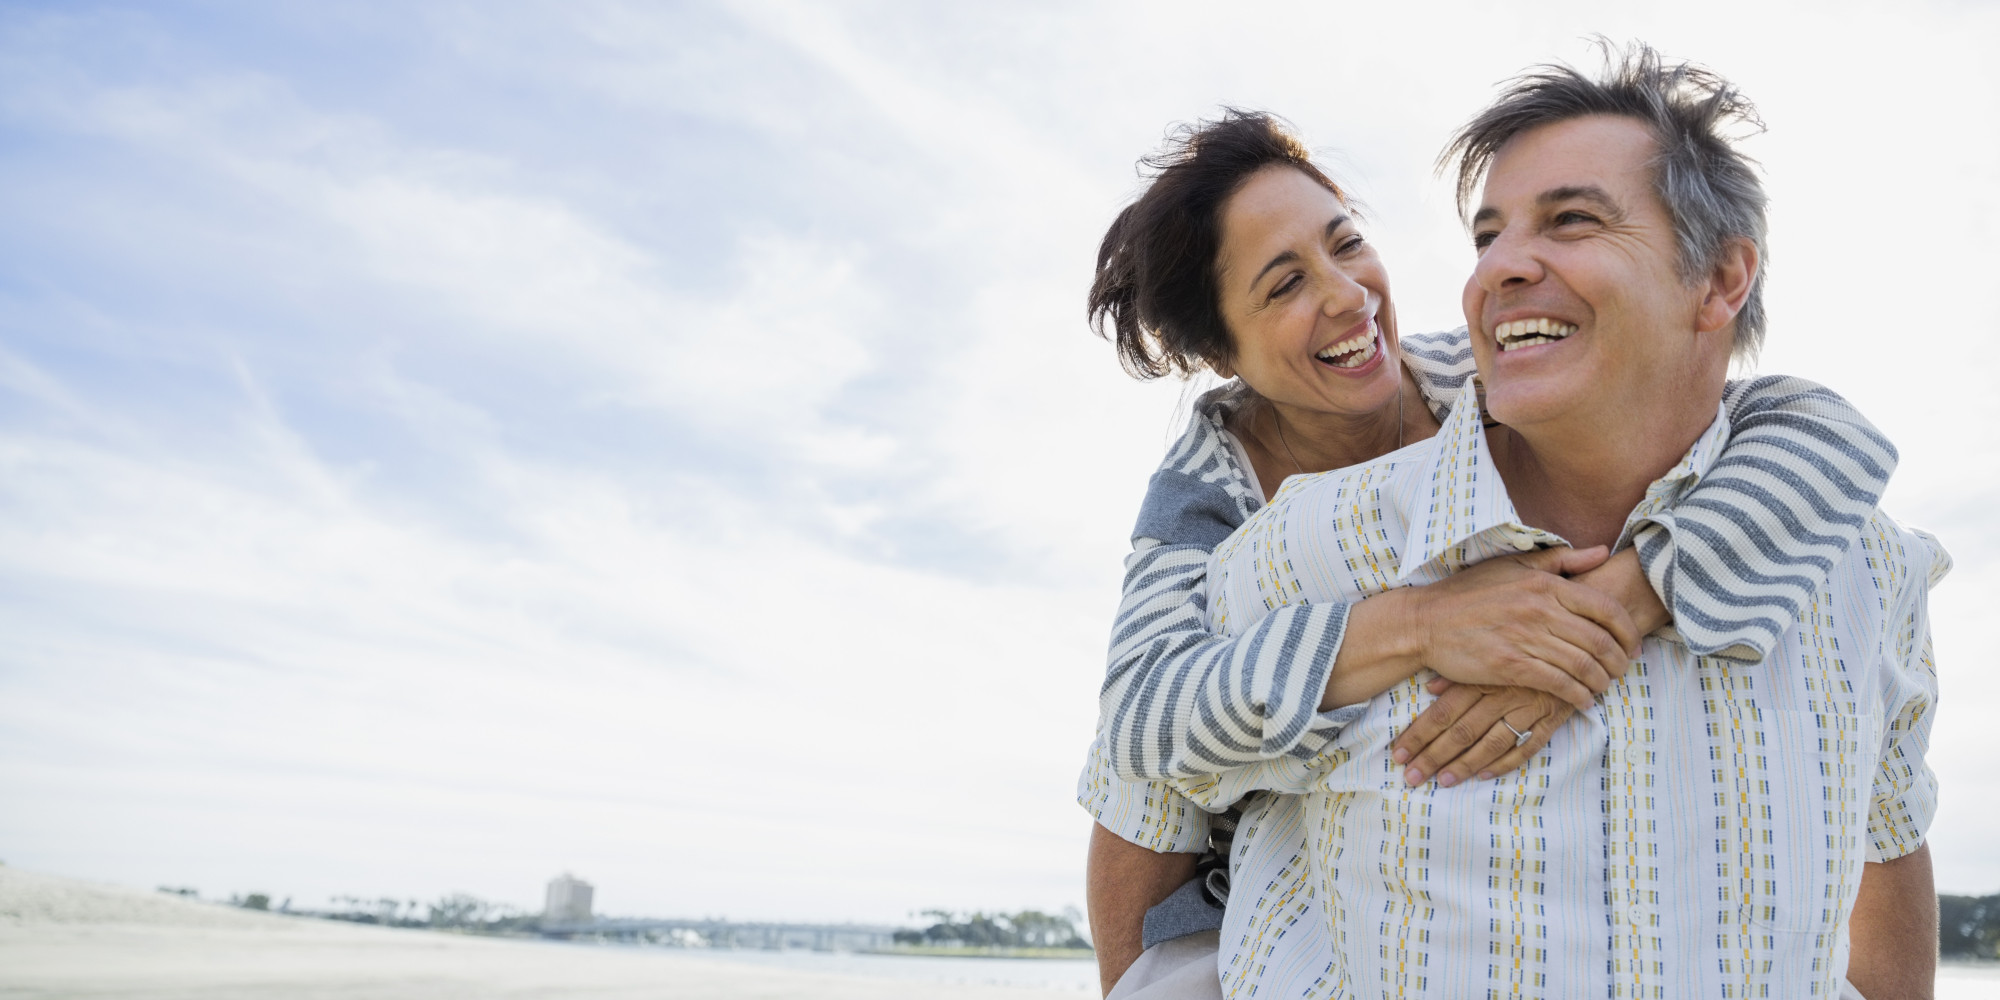 6 Simple Ways To Grow Happier With Age | HuffPost